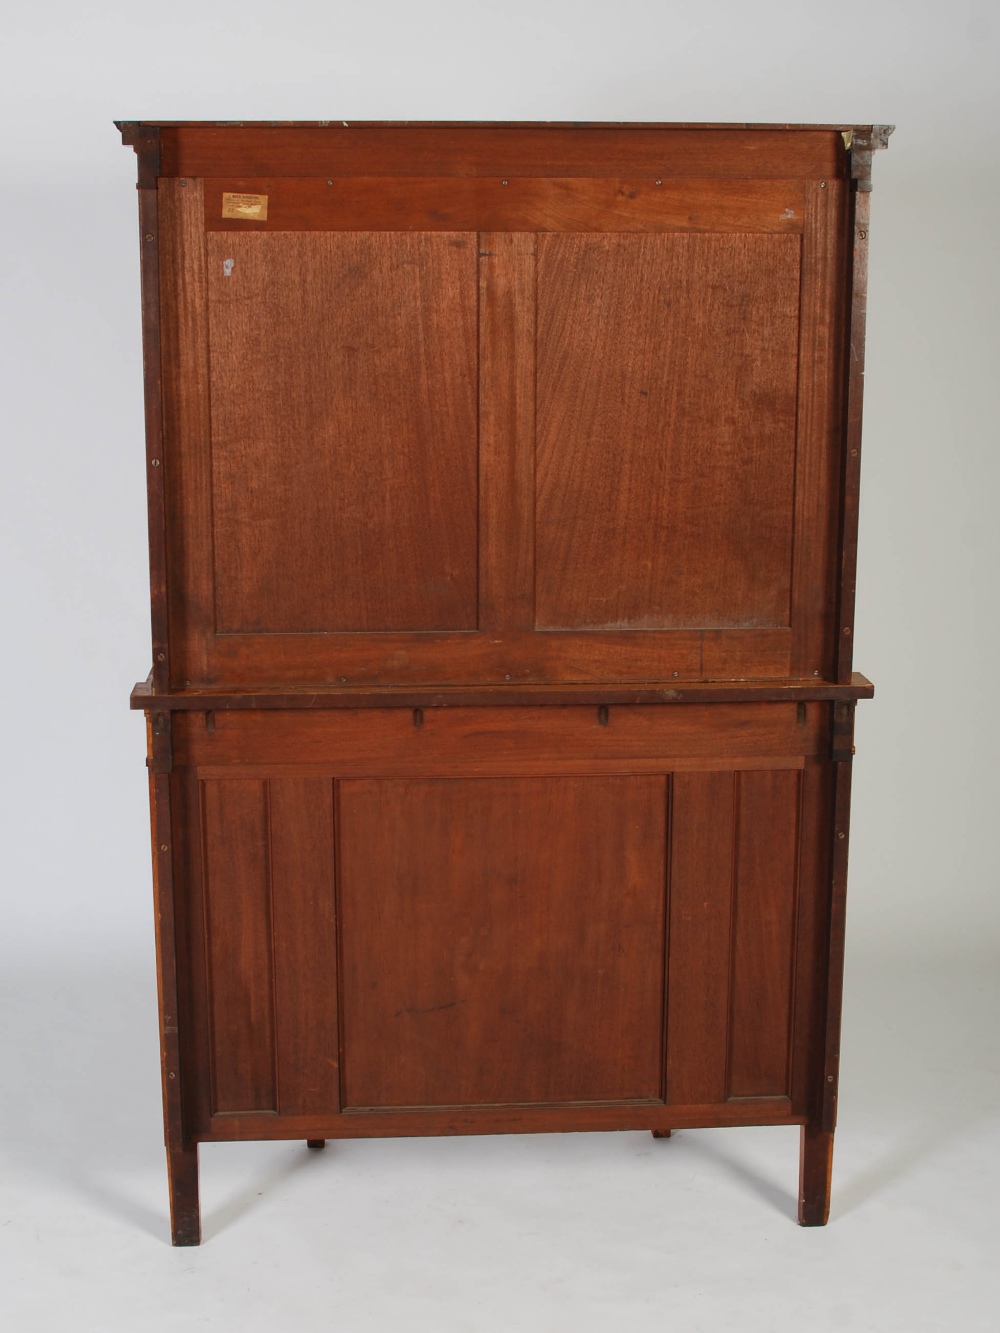 A late 19th century satinwood and ebony lined display cabinet on stand, the moulded cornice above - Image 6 of 7